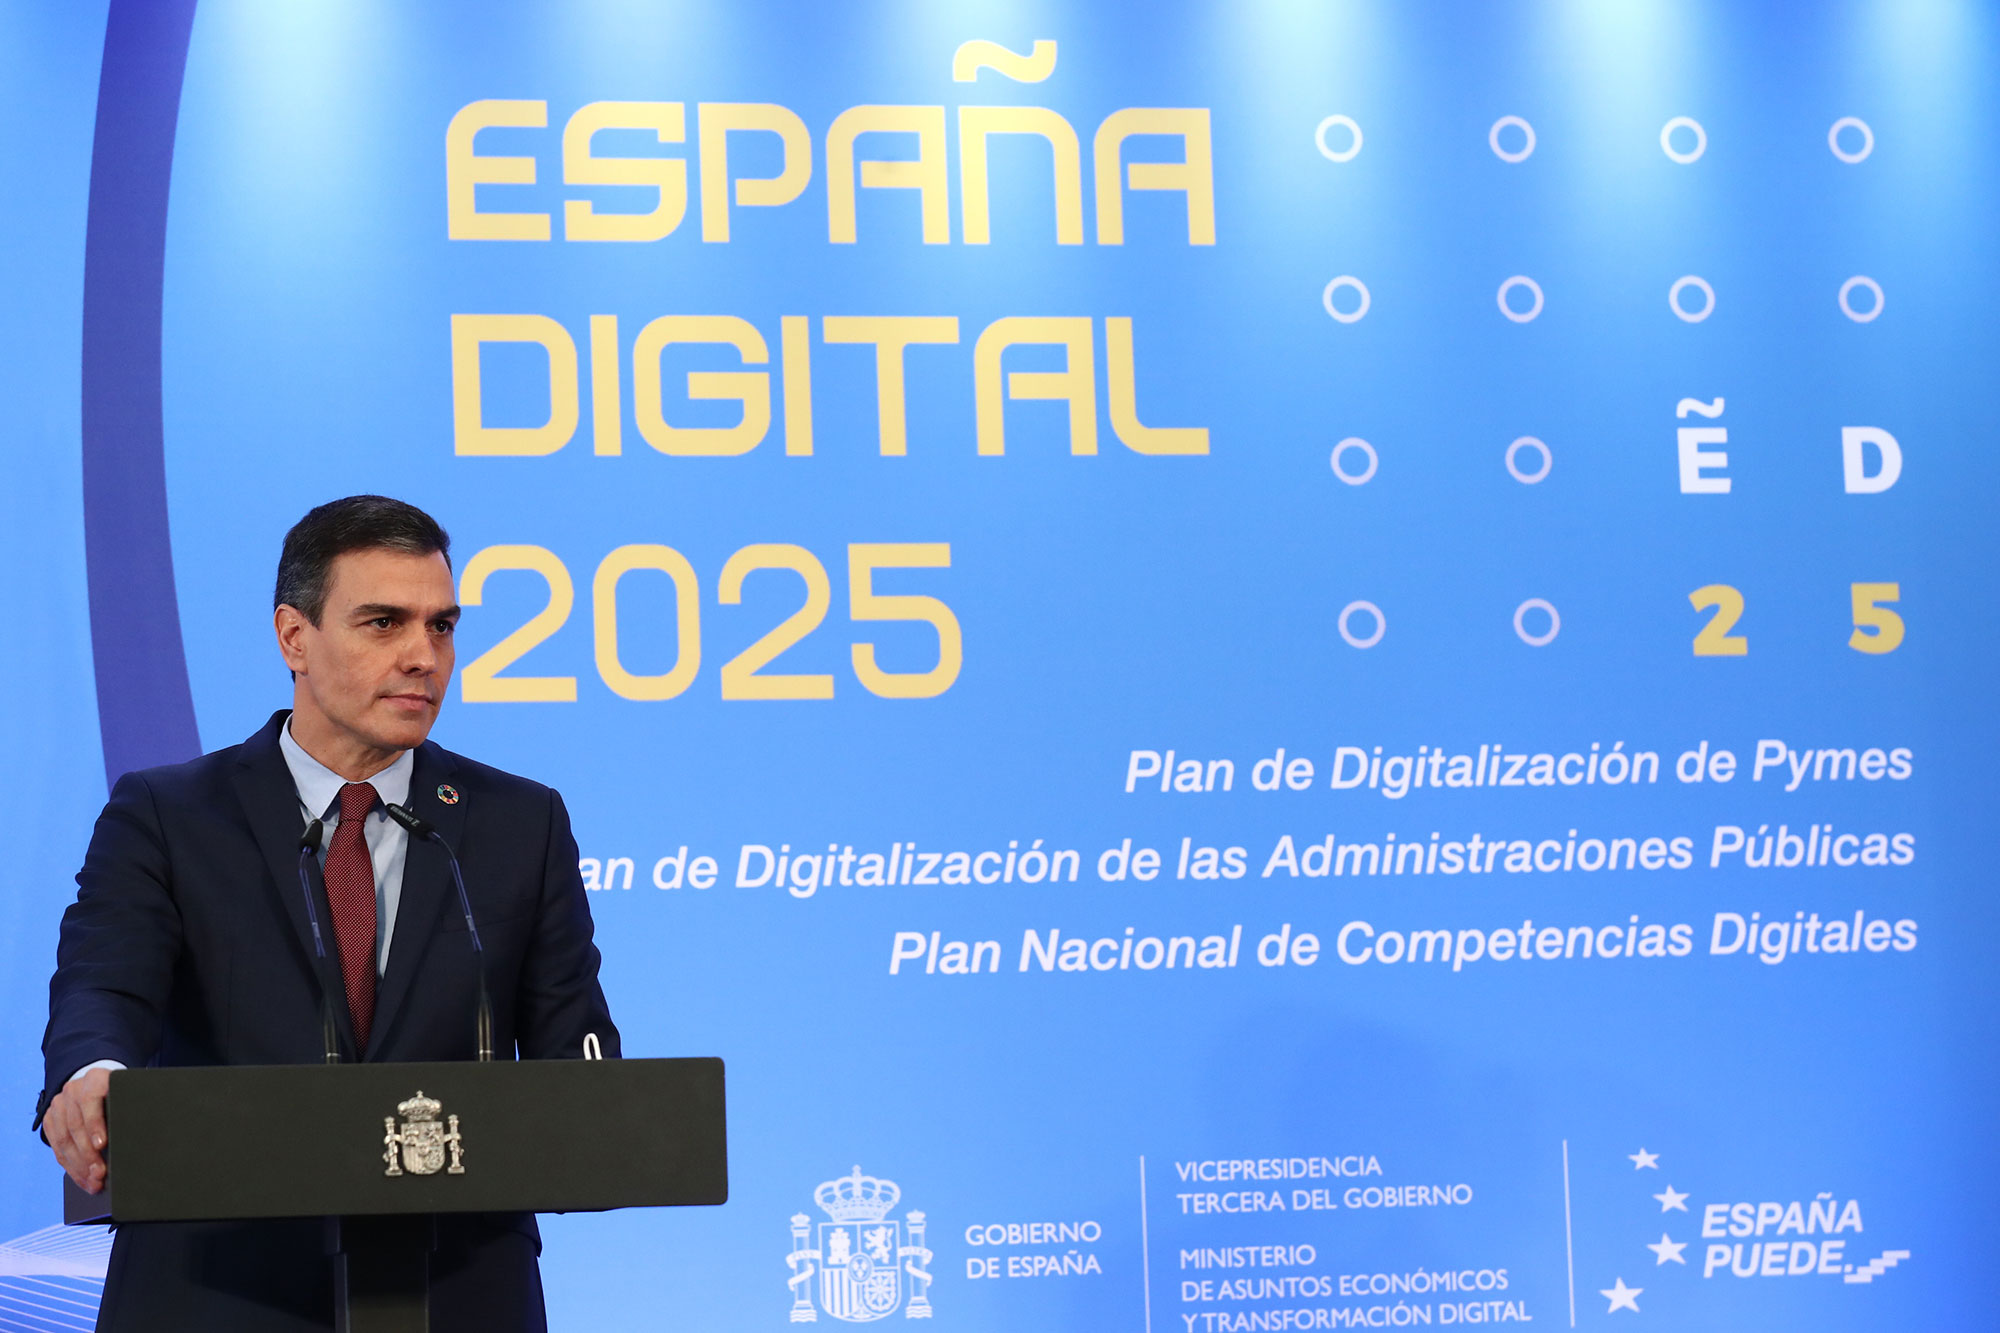 La Moncloa. 27/01/2021. Pedro Sánchez announces 11-billion euro investment  to boost digitalisation of SMEs and public authorities and strengthen  digital skills [President/News]